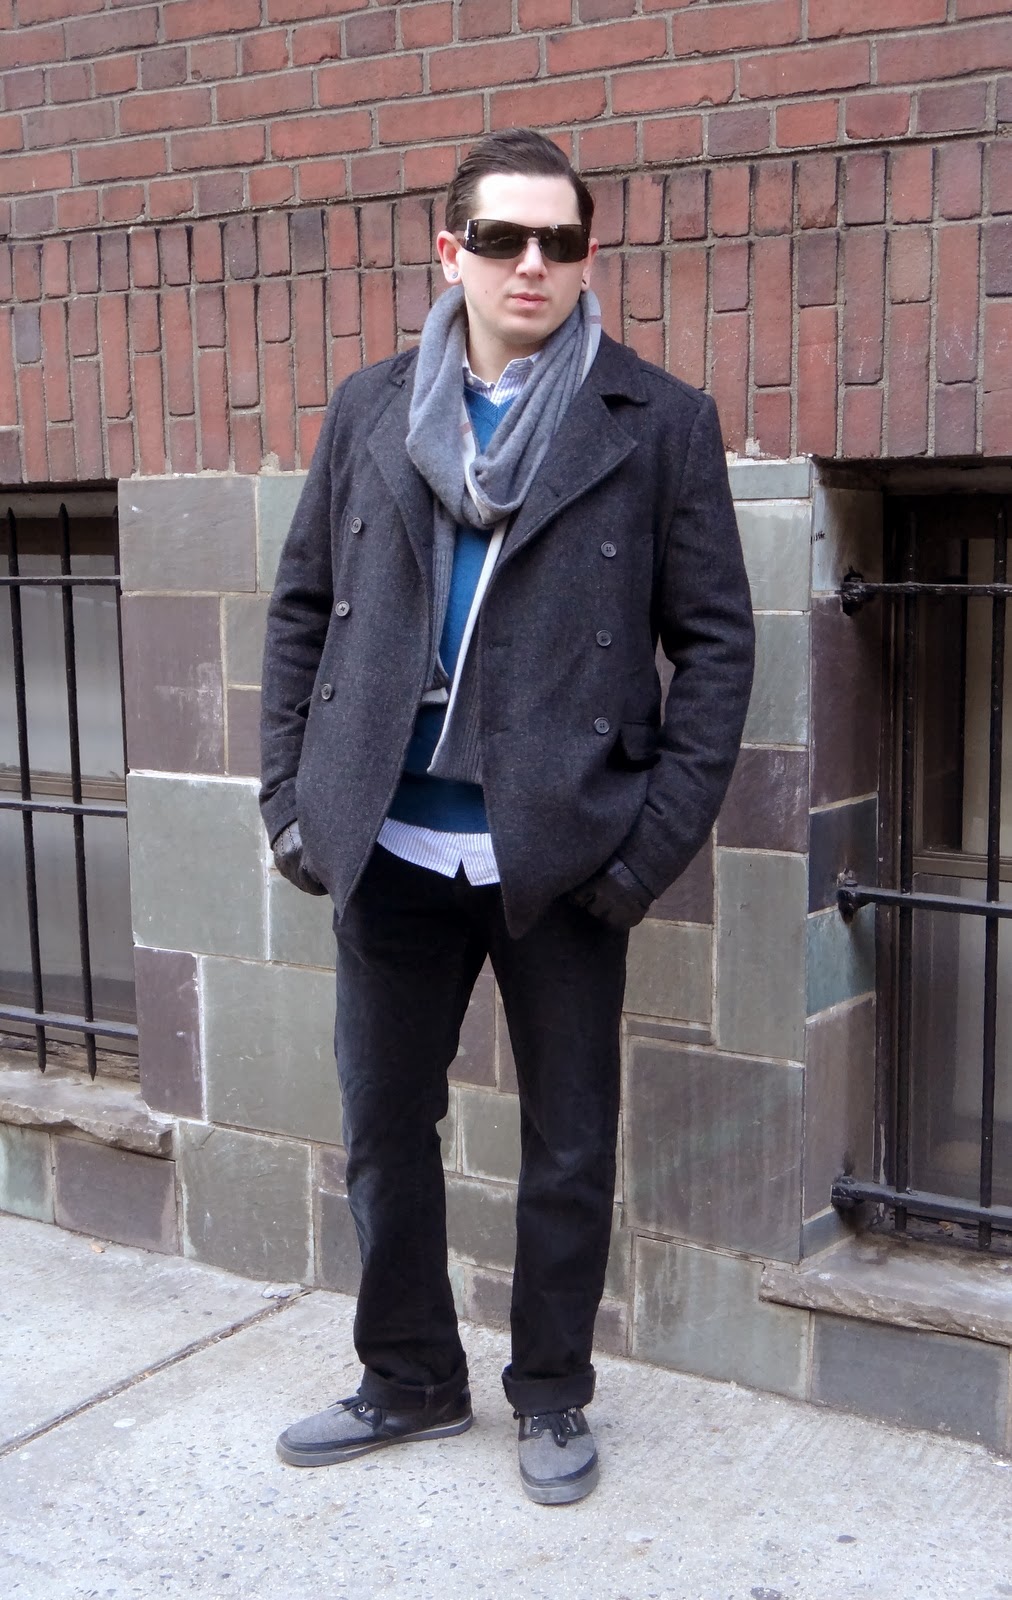 The Shy Stylist - a men's style blog: Style Feature: Winter Pic(k)s